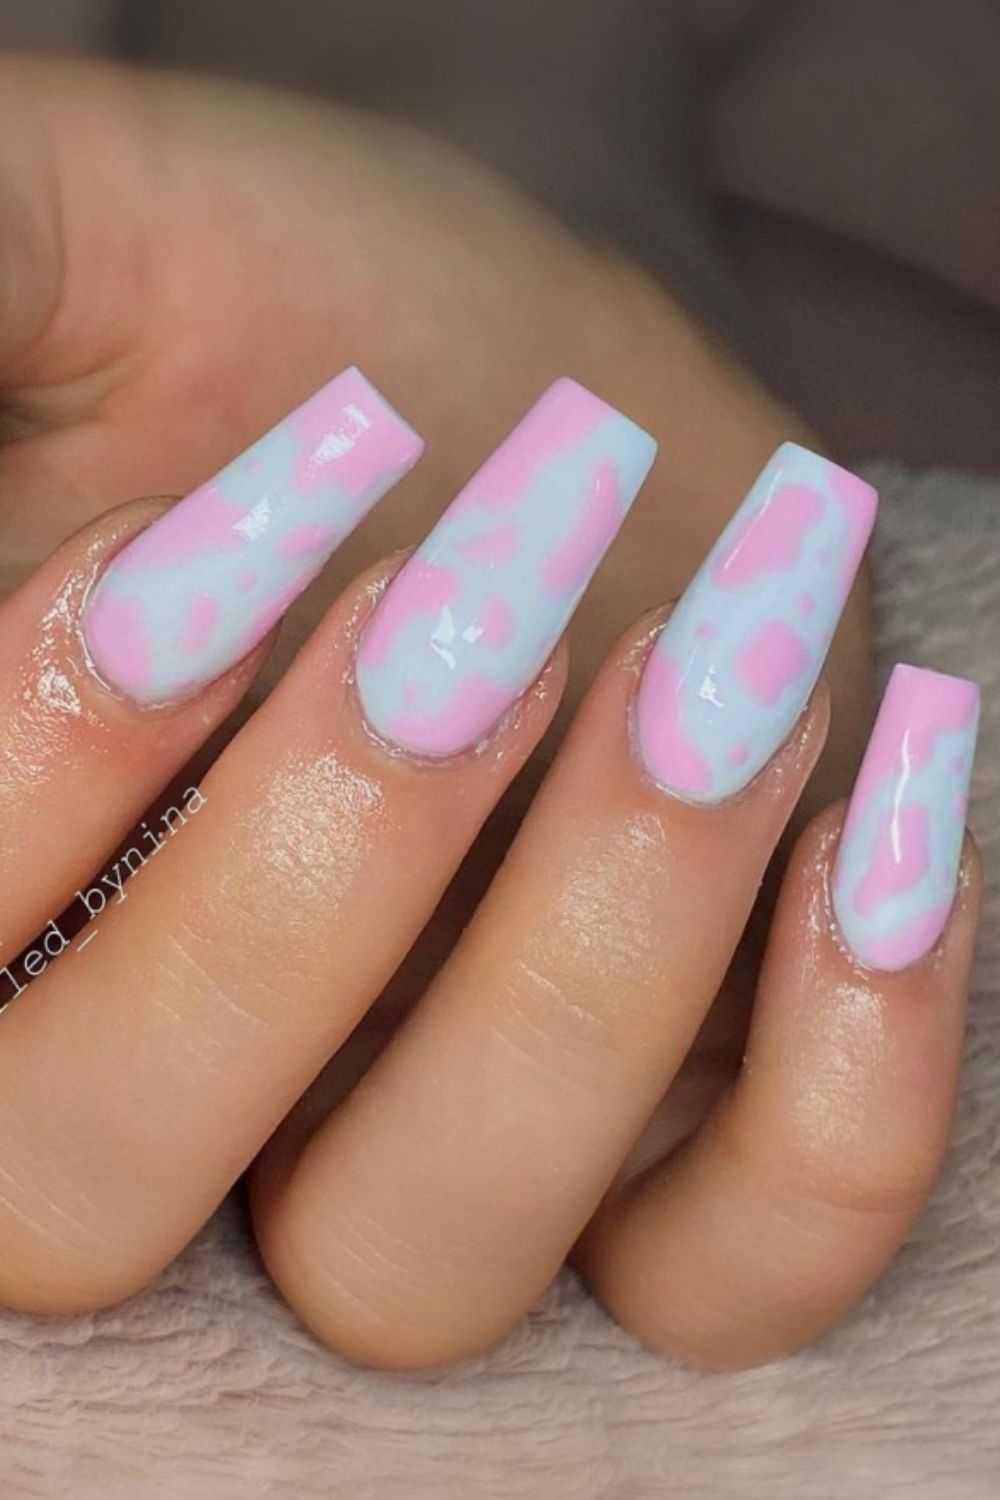 Pink and white coffin nails